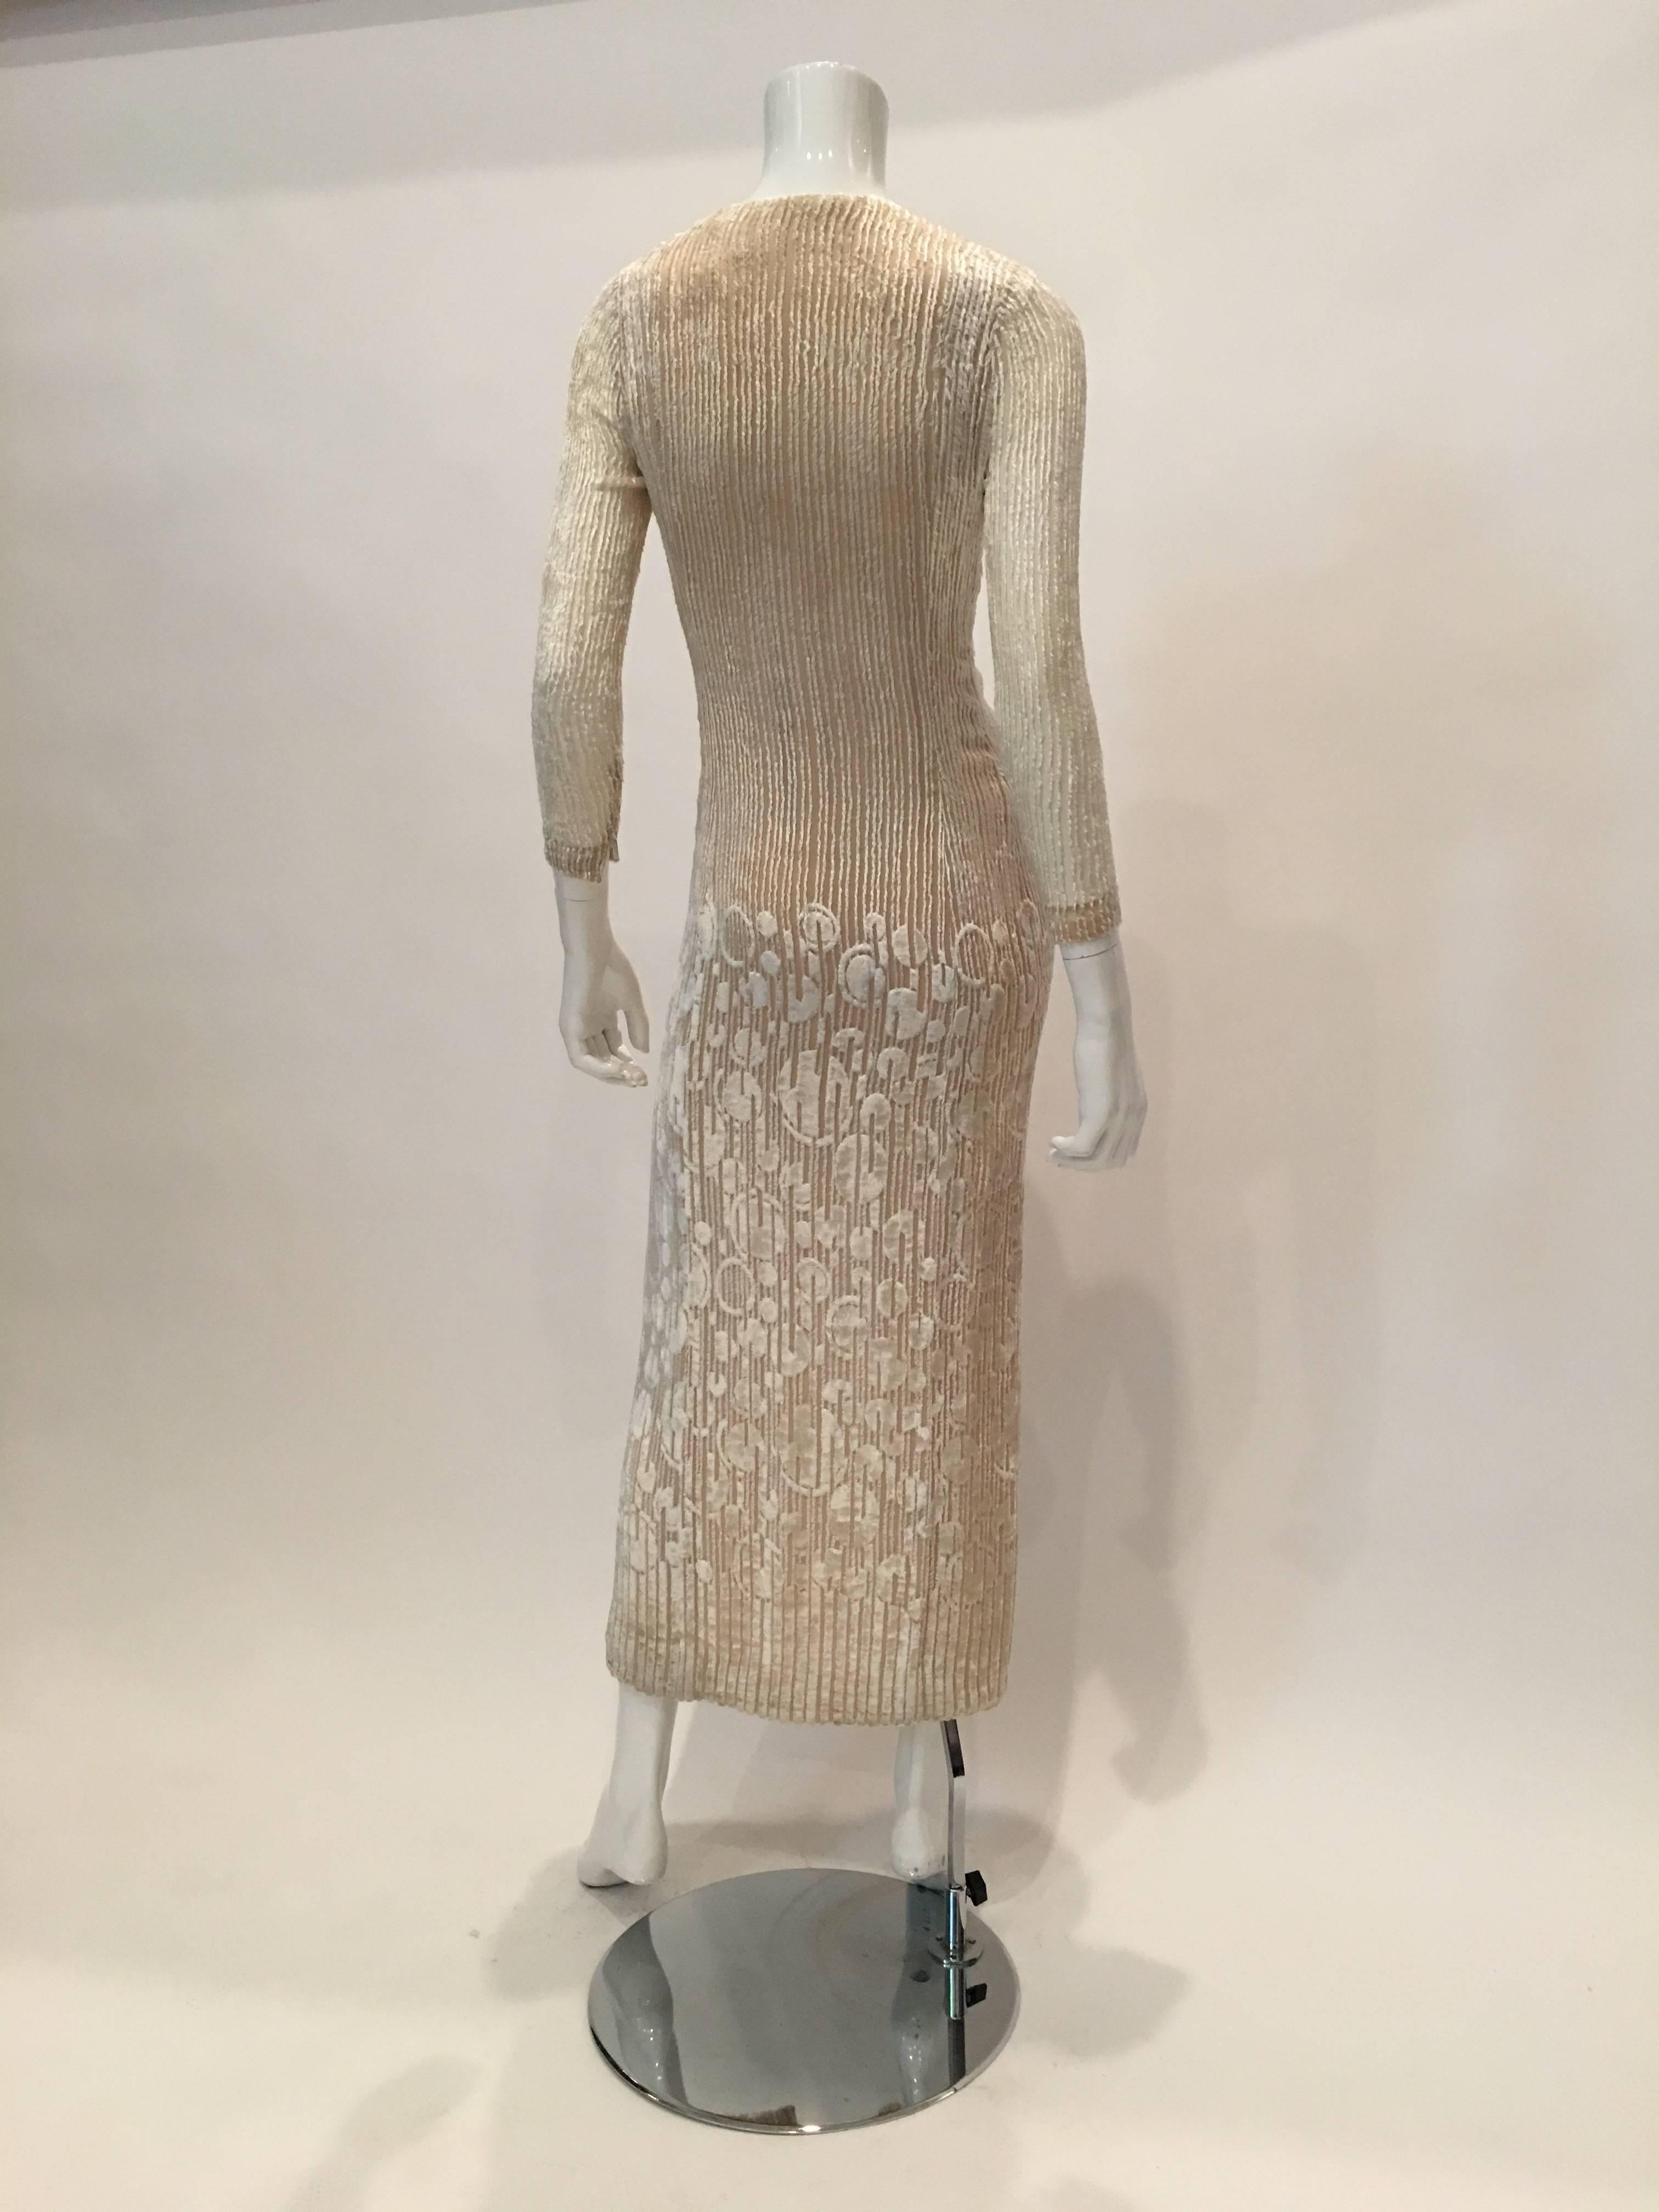 Pauline Trigere 1970's Ivory Cut Velvet Button Front Long Dress with Nude Silk Lining and 8 Front Buttons

Measurements : *ALL MEASUREMENTS TAKEN FLAT* 
Mannequin size : 2-4 (Dress fits mannequin tightly)
Shoulders: 15